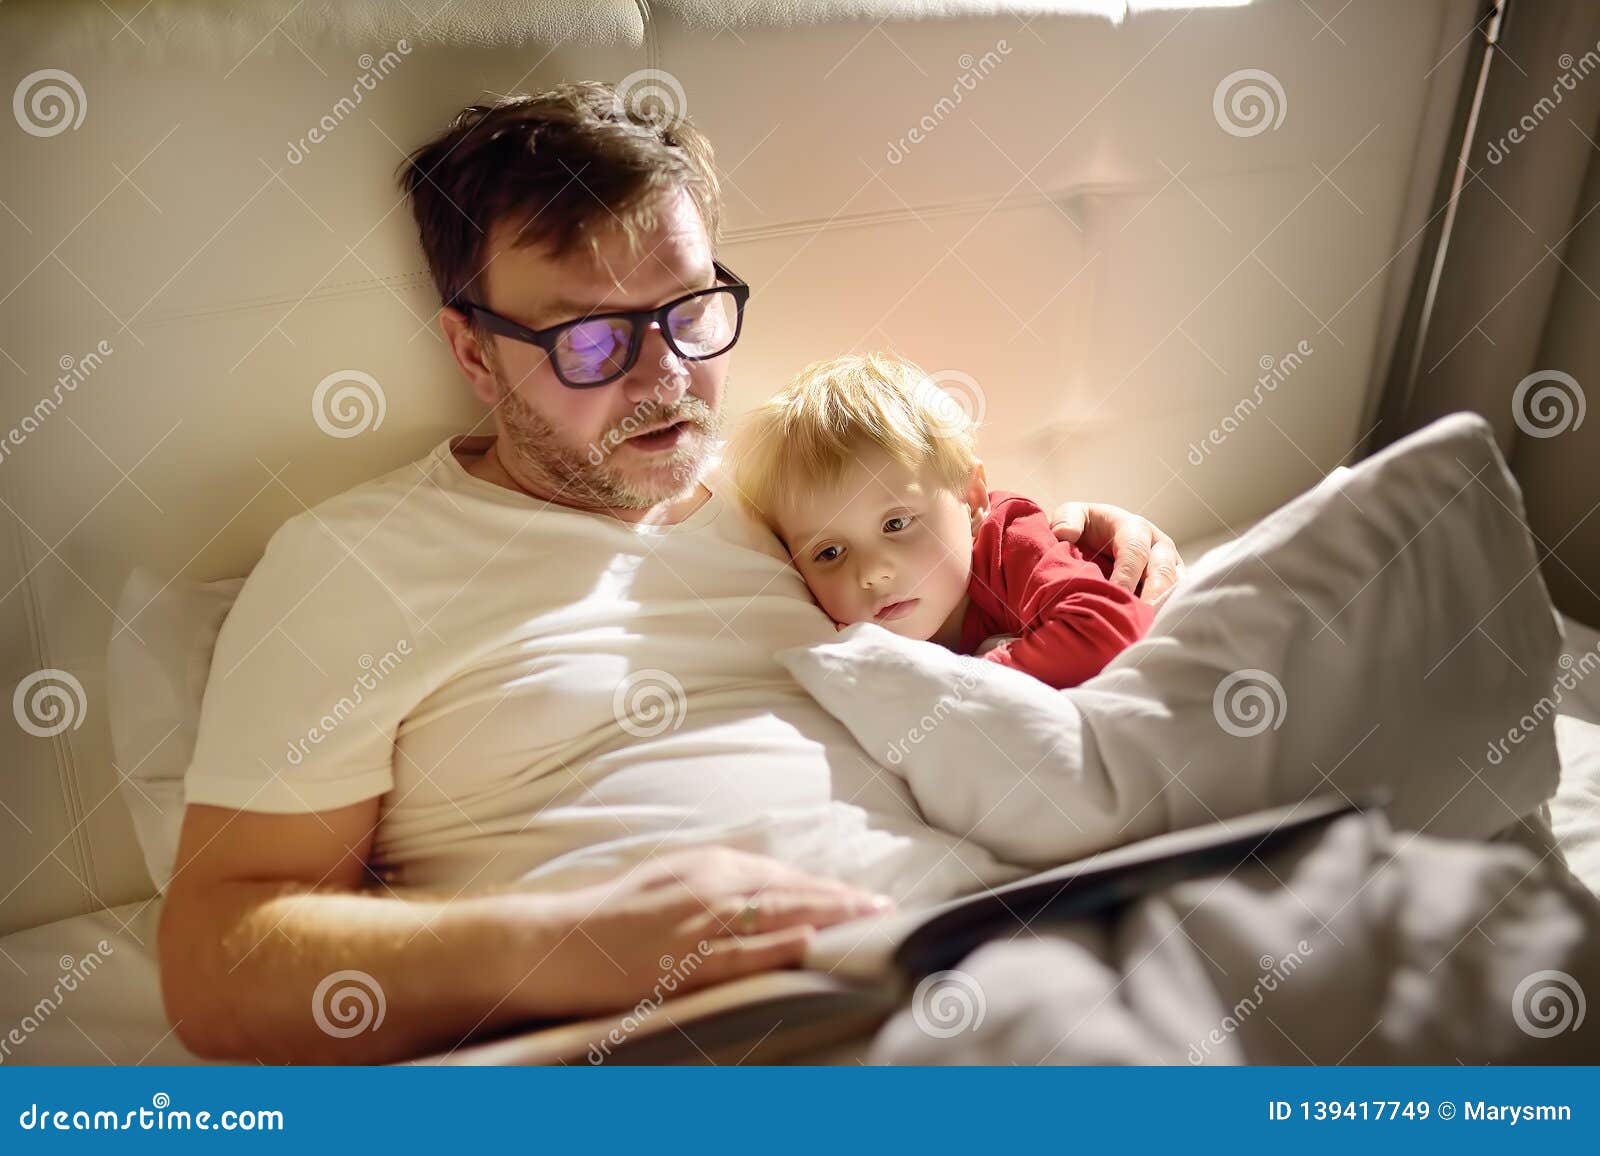 father reading bedtime stories to child. dad putting son to sleep